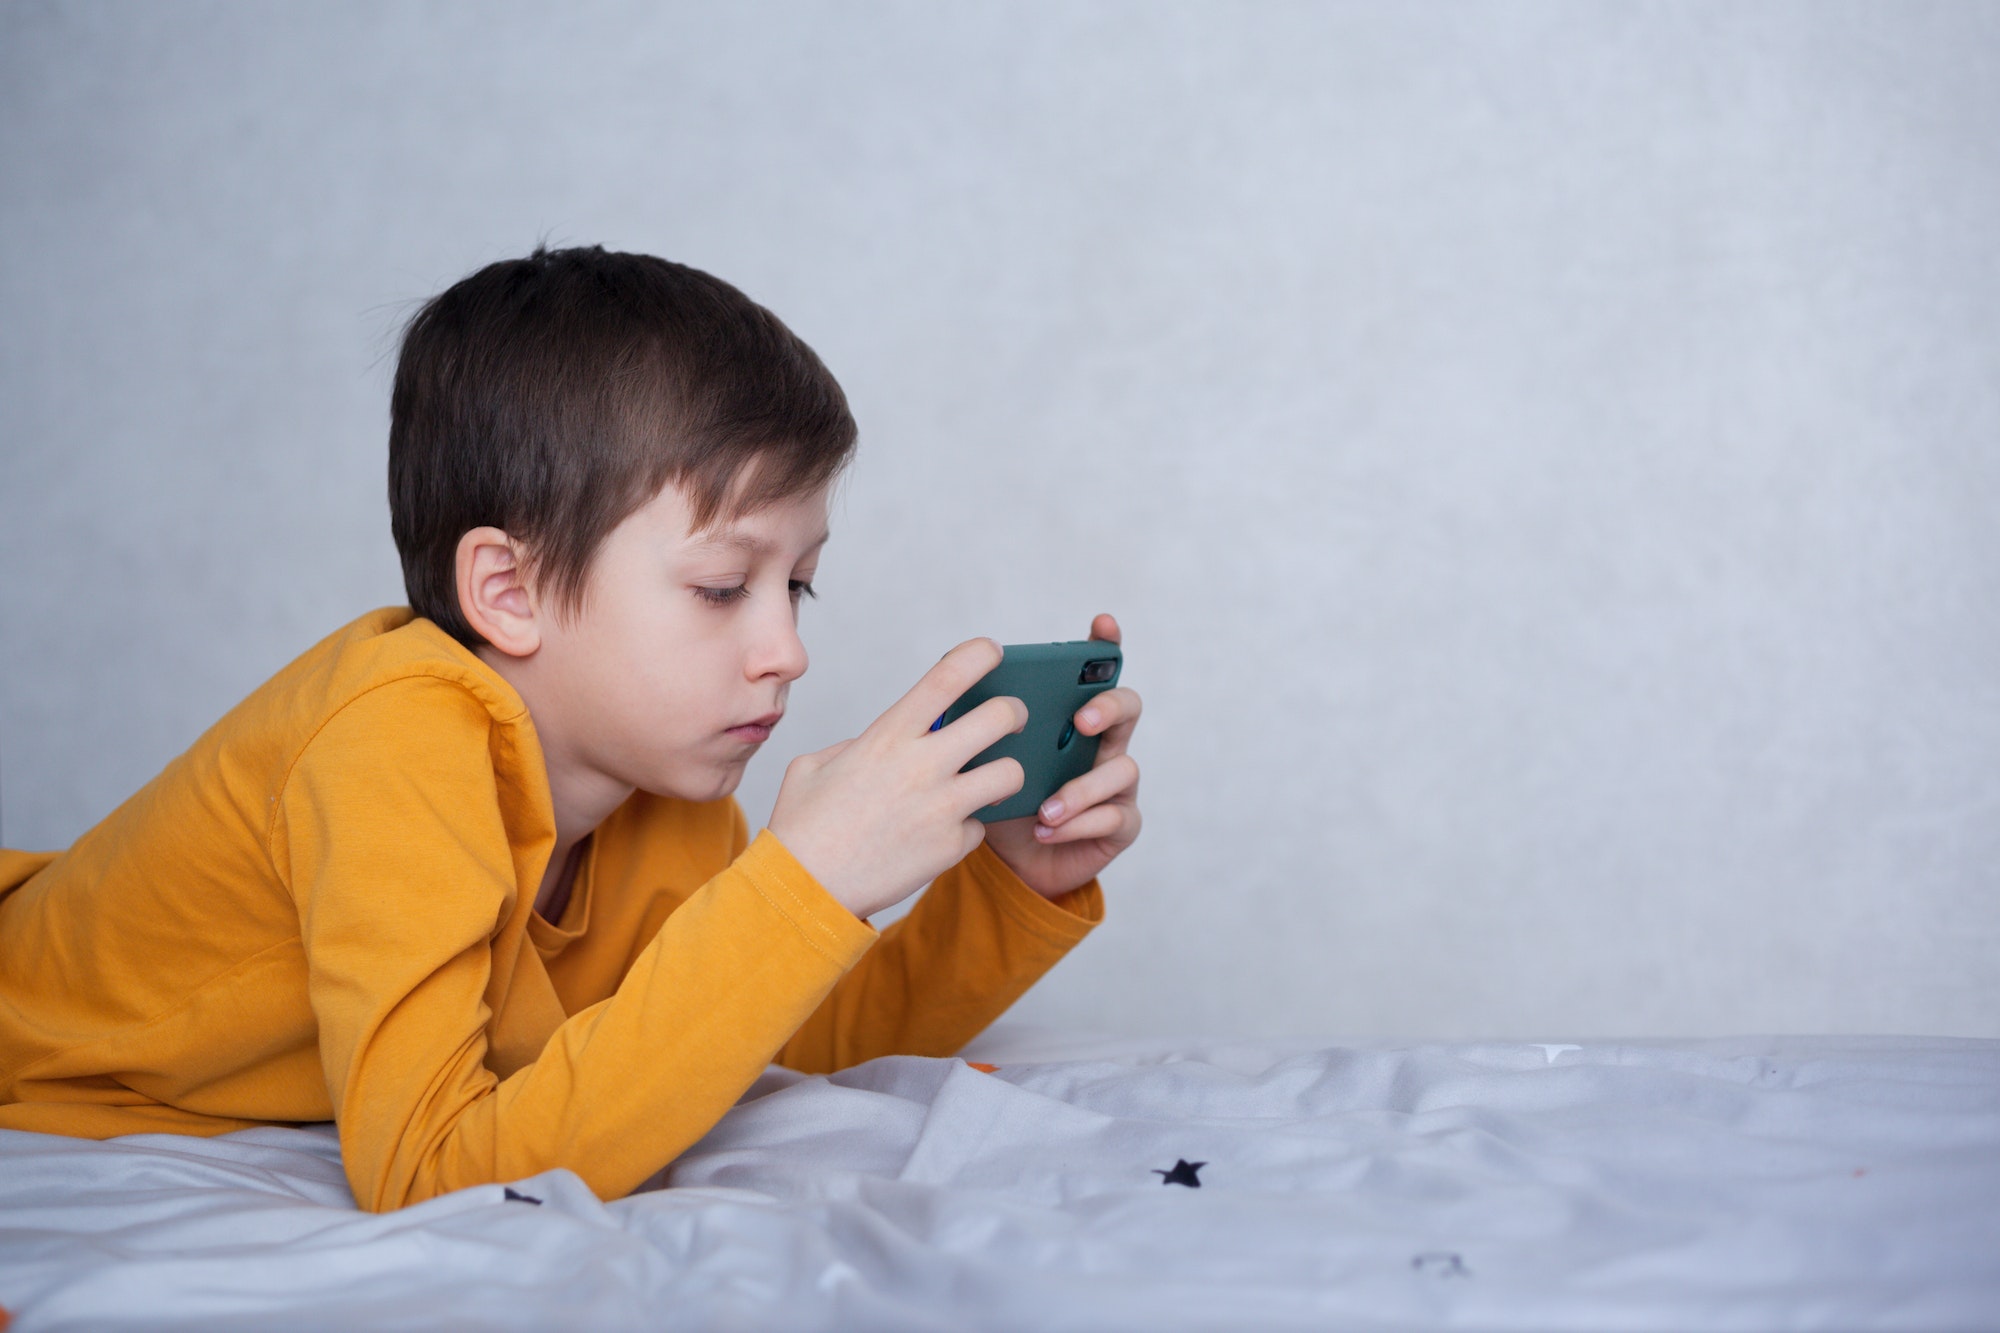 Cute little kid boy plays in video game on his smartphone. Child has fun playing videogame.